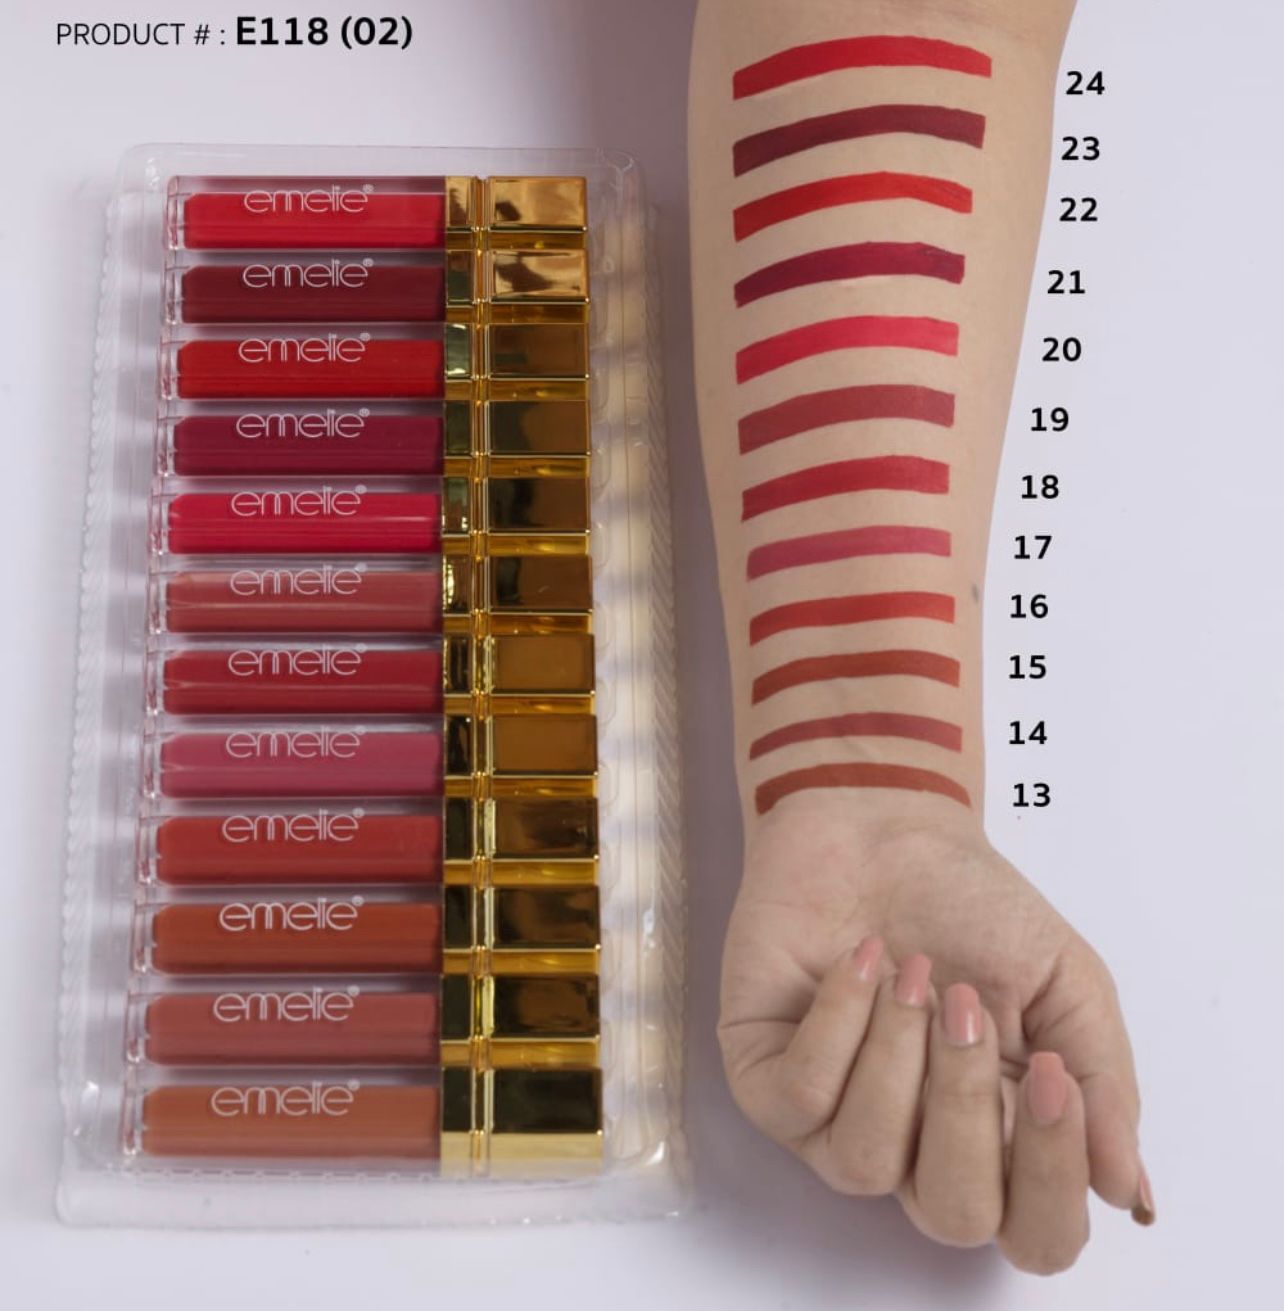 EMELIE COMPLETE PACK OF 12 LIP GLOSS E118 RED COLLECTION